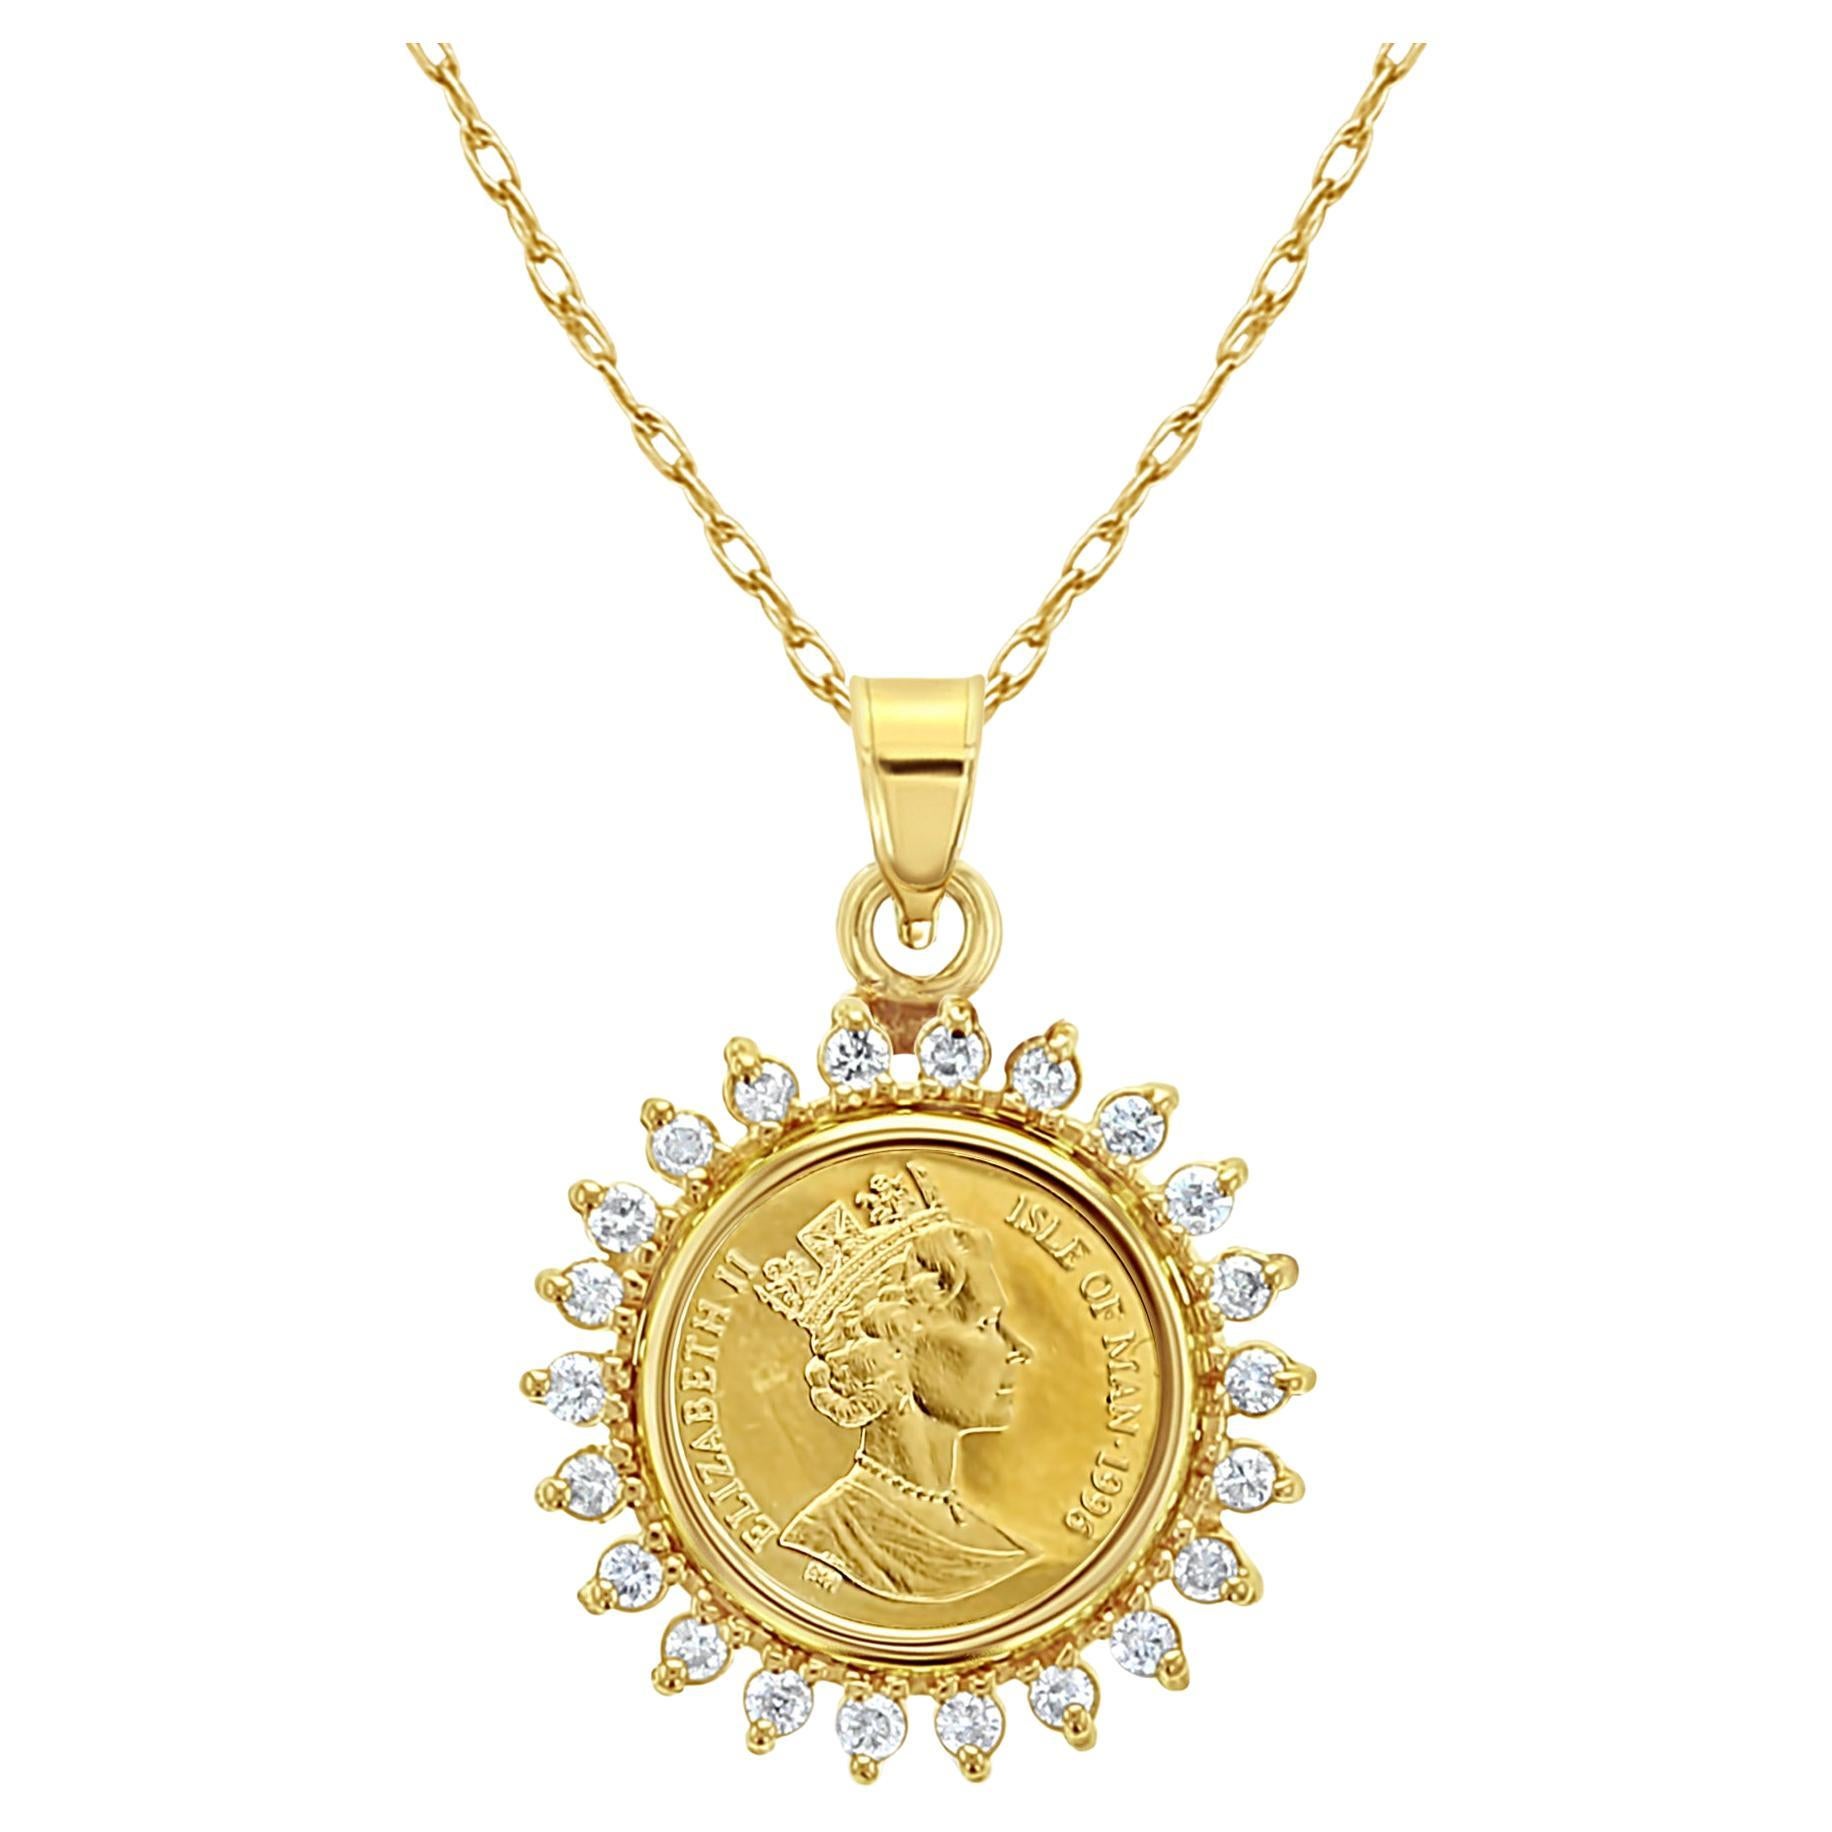 Elizabeth II Isle of Man Gold Coin Necklace with Diamond Halo